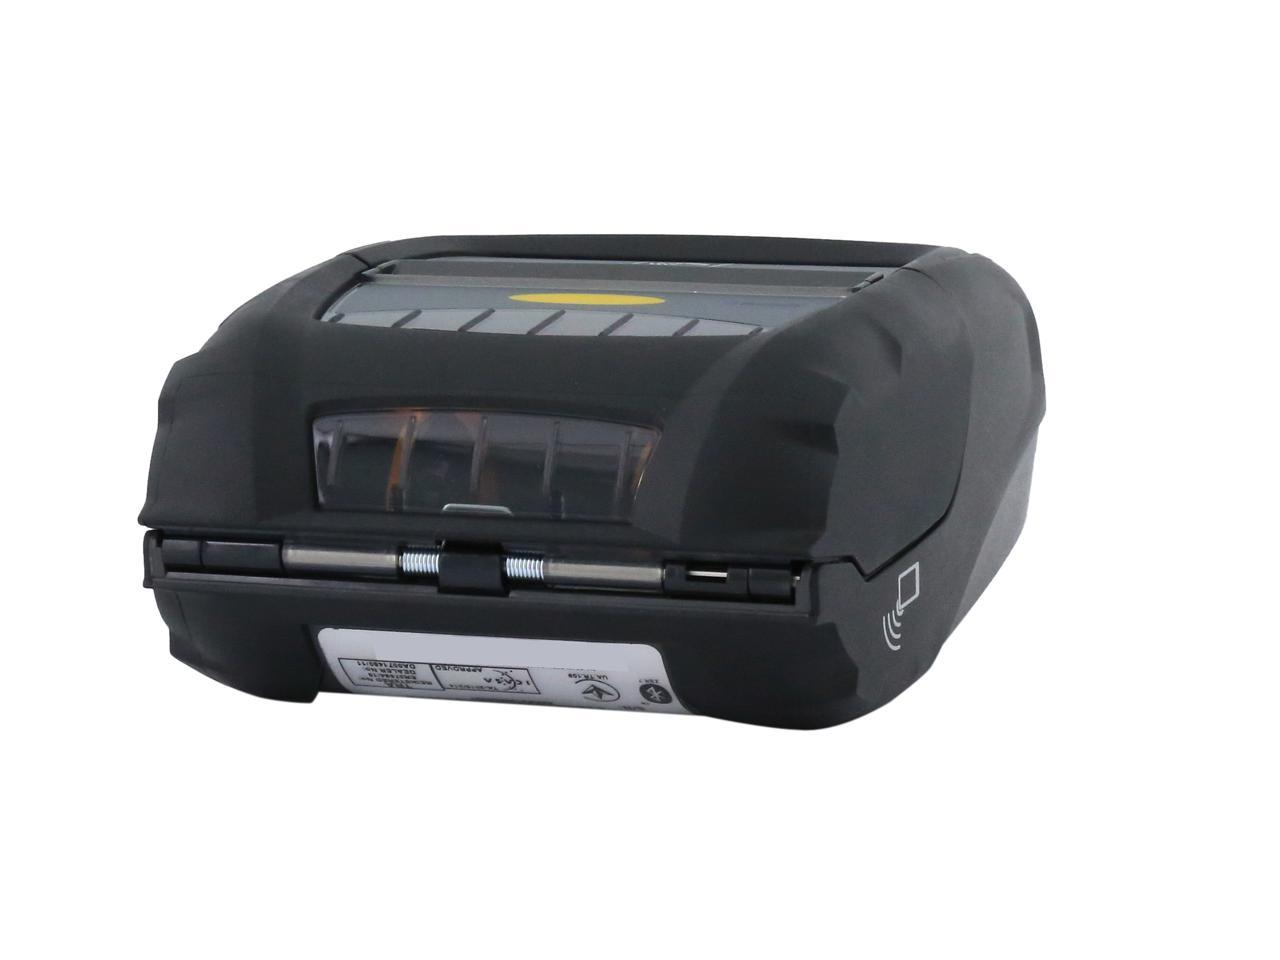 Zebra Zq510 3 Mobile Direct Thermal Receipt And Label Printer 203 Dpi Bluetooth 40 Linered 8134